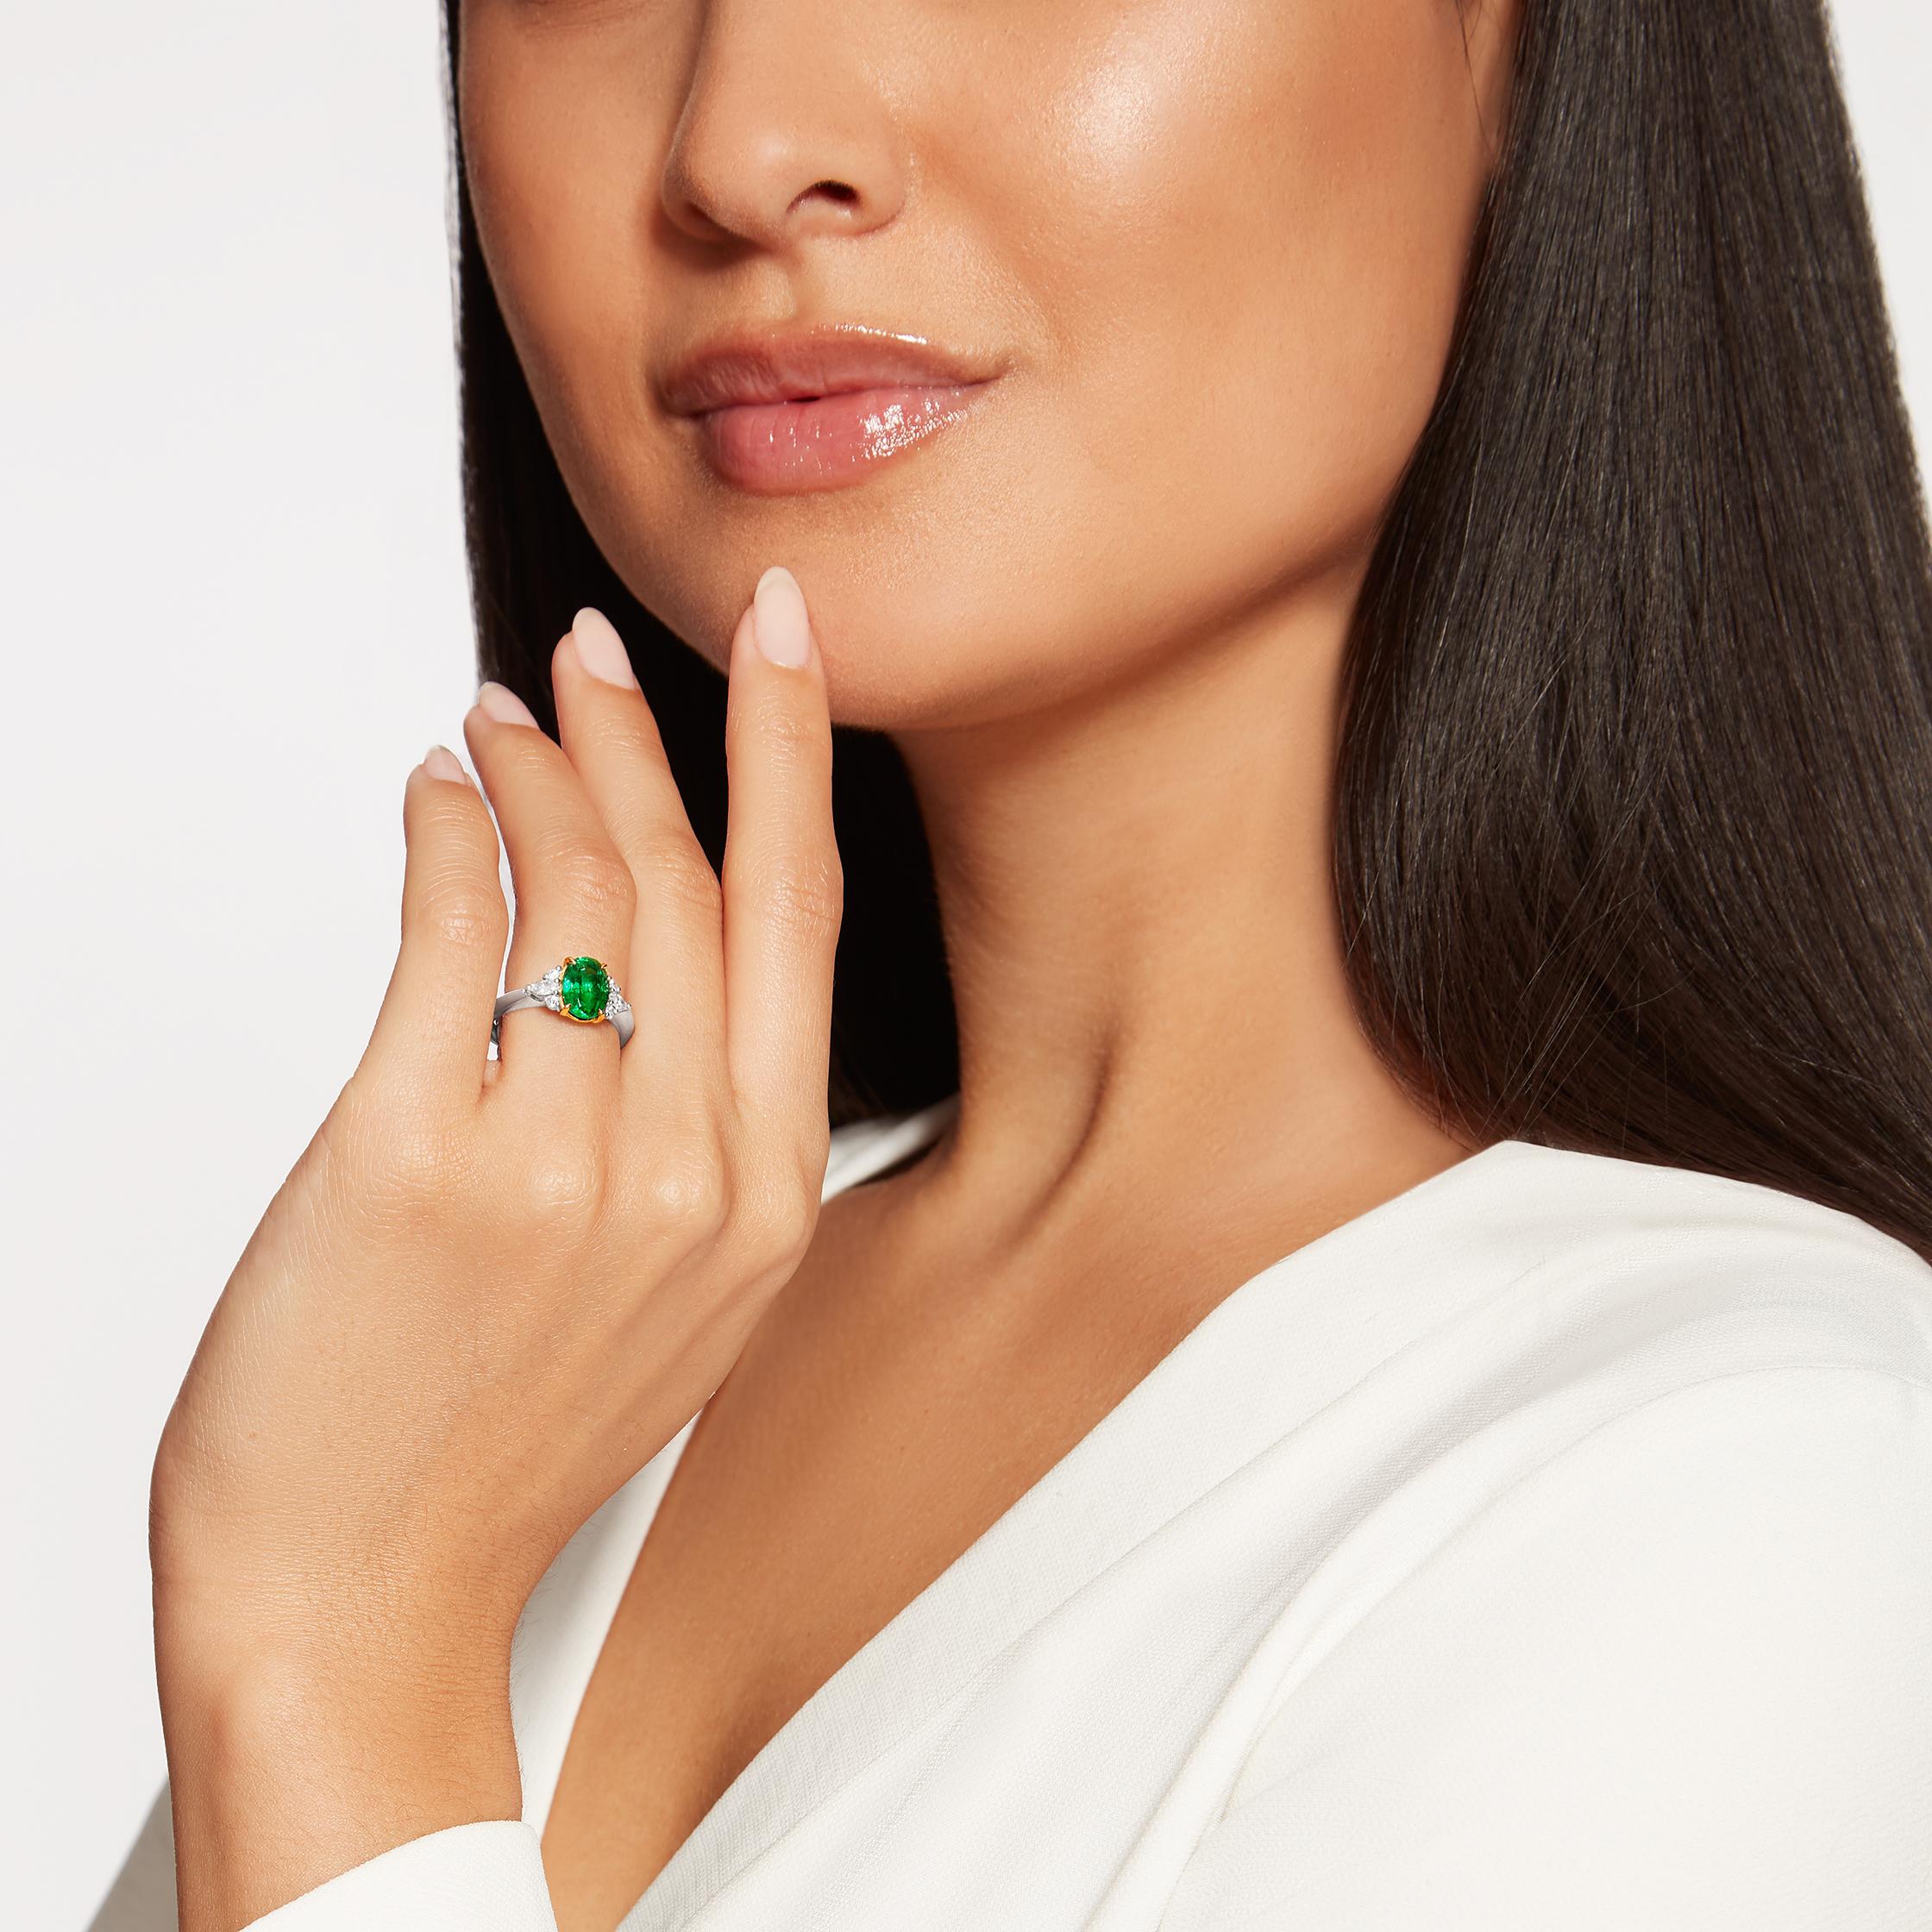 This beautiful papillon ring features an oval emerald that is uniquely set with 18K yellow gold claws in a platinum setting featuring marquise and round diamonds.

- 1.55 carat oval emerald
- 2 marquise and 4 round diamonds totalling approx. 0.24